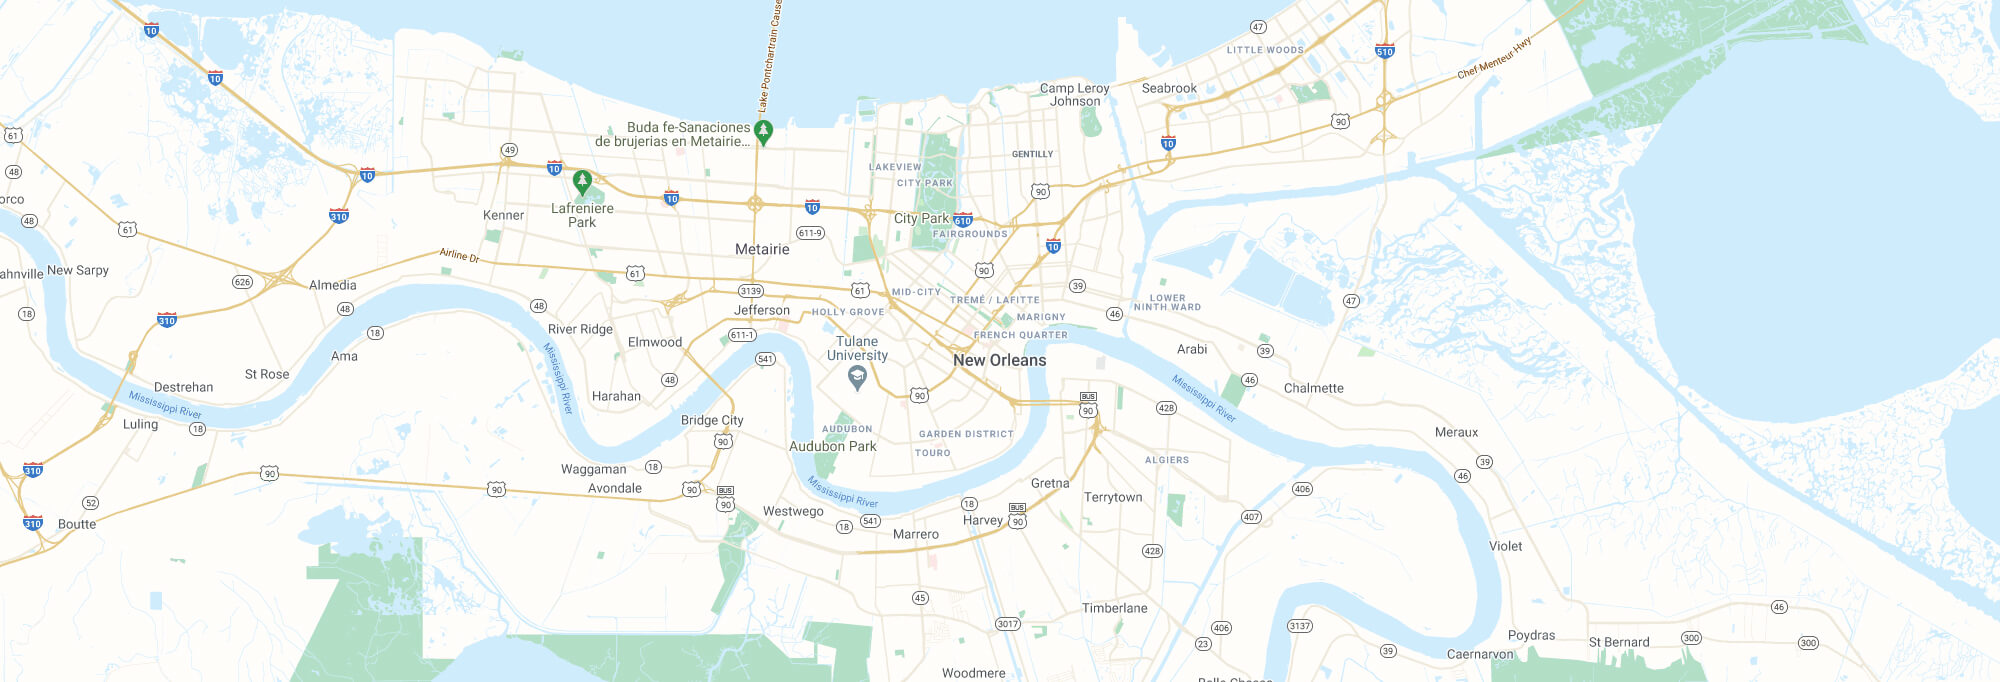 New Orleans city map